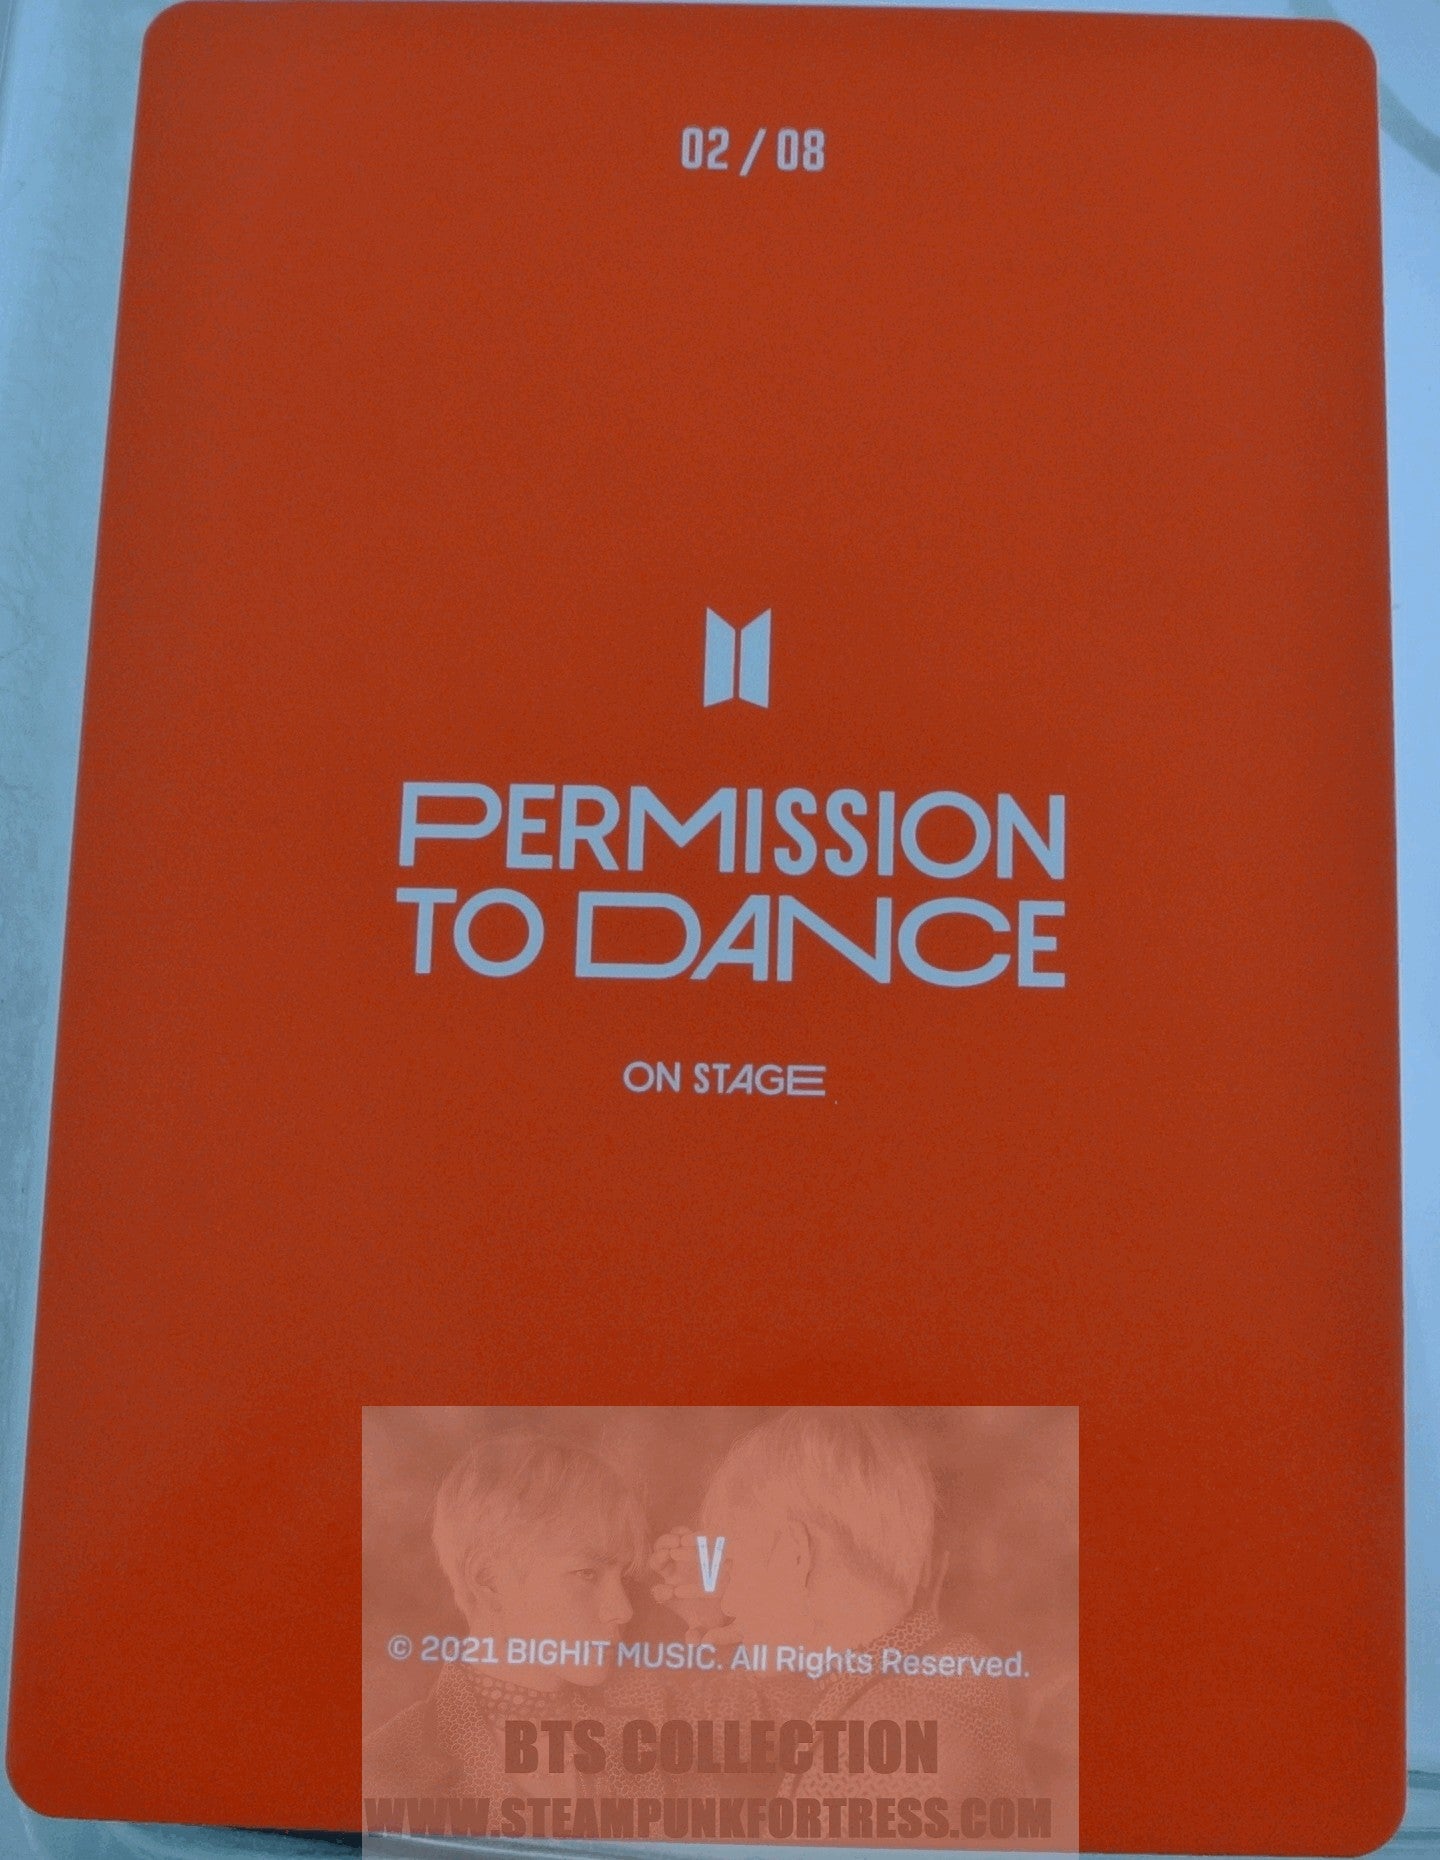 BTS V KIM TAEHYUNG TAE-HYUNG PTD 2021 PERMISSION TO DANCE ON STAGE PTD #2 OF 8 PHOTOCARD PHOTO CARD NEW OFFICIAL MERCHANDISE